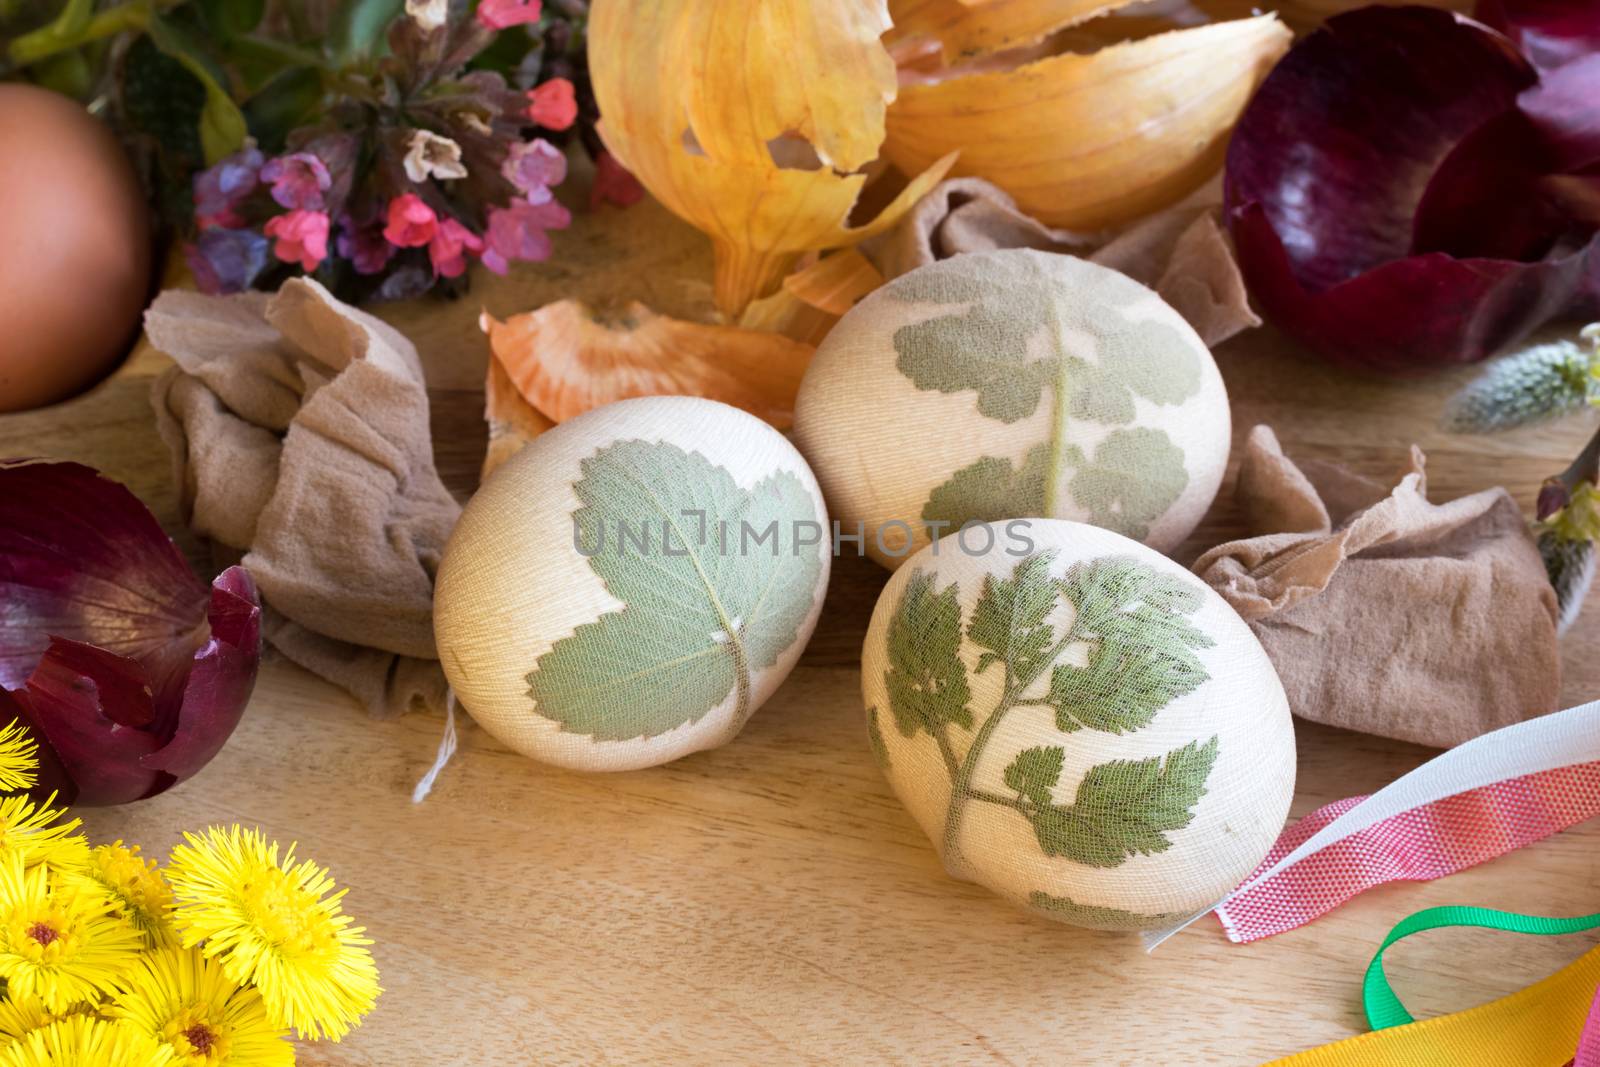 Preparation of Easter eggs for dying with onion peels: eggs with a pattern of fresh herbs, onion peels, and spring flowers (coltsfoot, lungwort) in the background